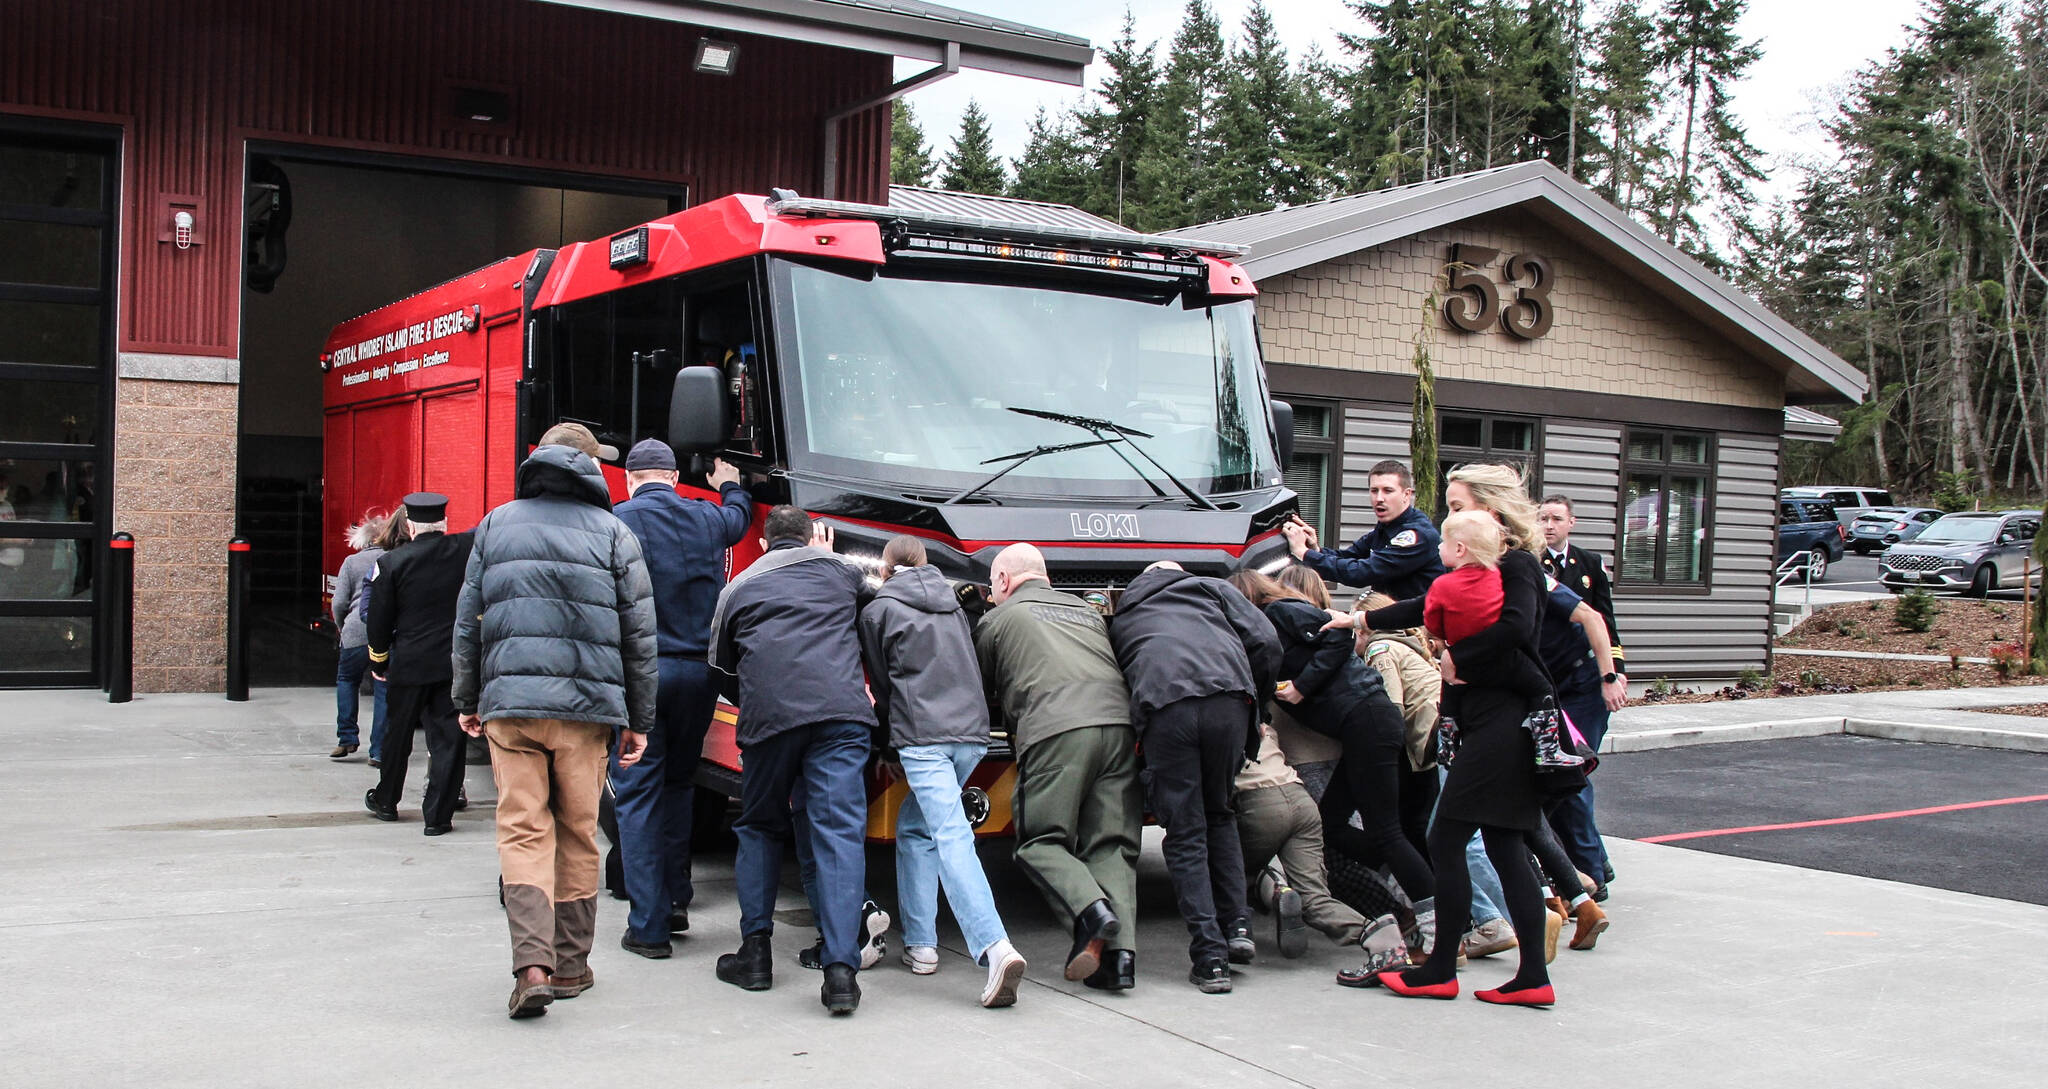 During the dedication ceremony, community members pushed a fire engine inside the new building. Fire Station 53 is dedicated to emergency responders and the citizens they protect. (Photo by Luisa Loi)